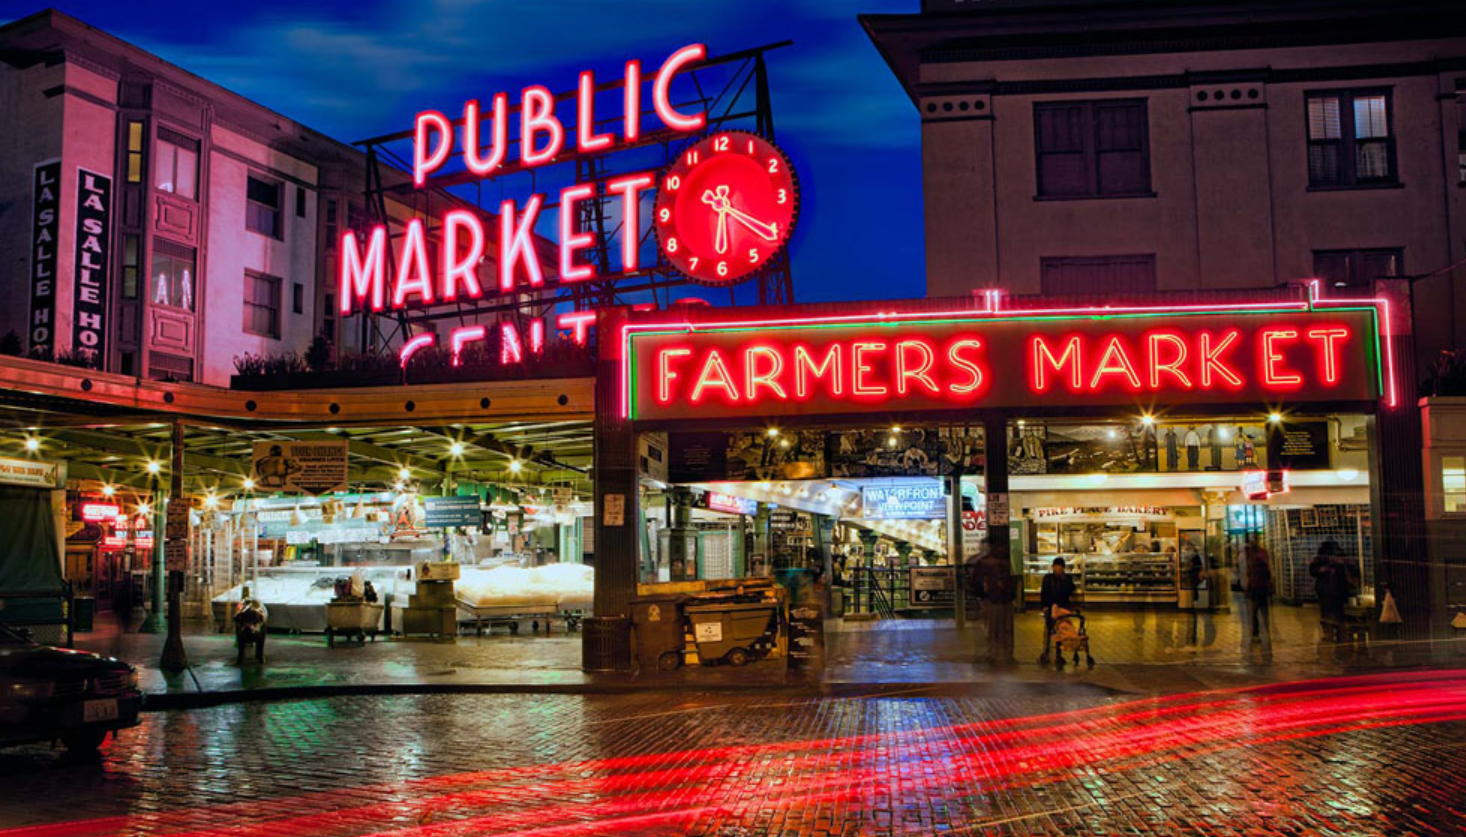 Pike Place Public Market - Seattle WA - Academic Med Executive Search